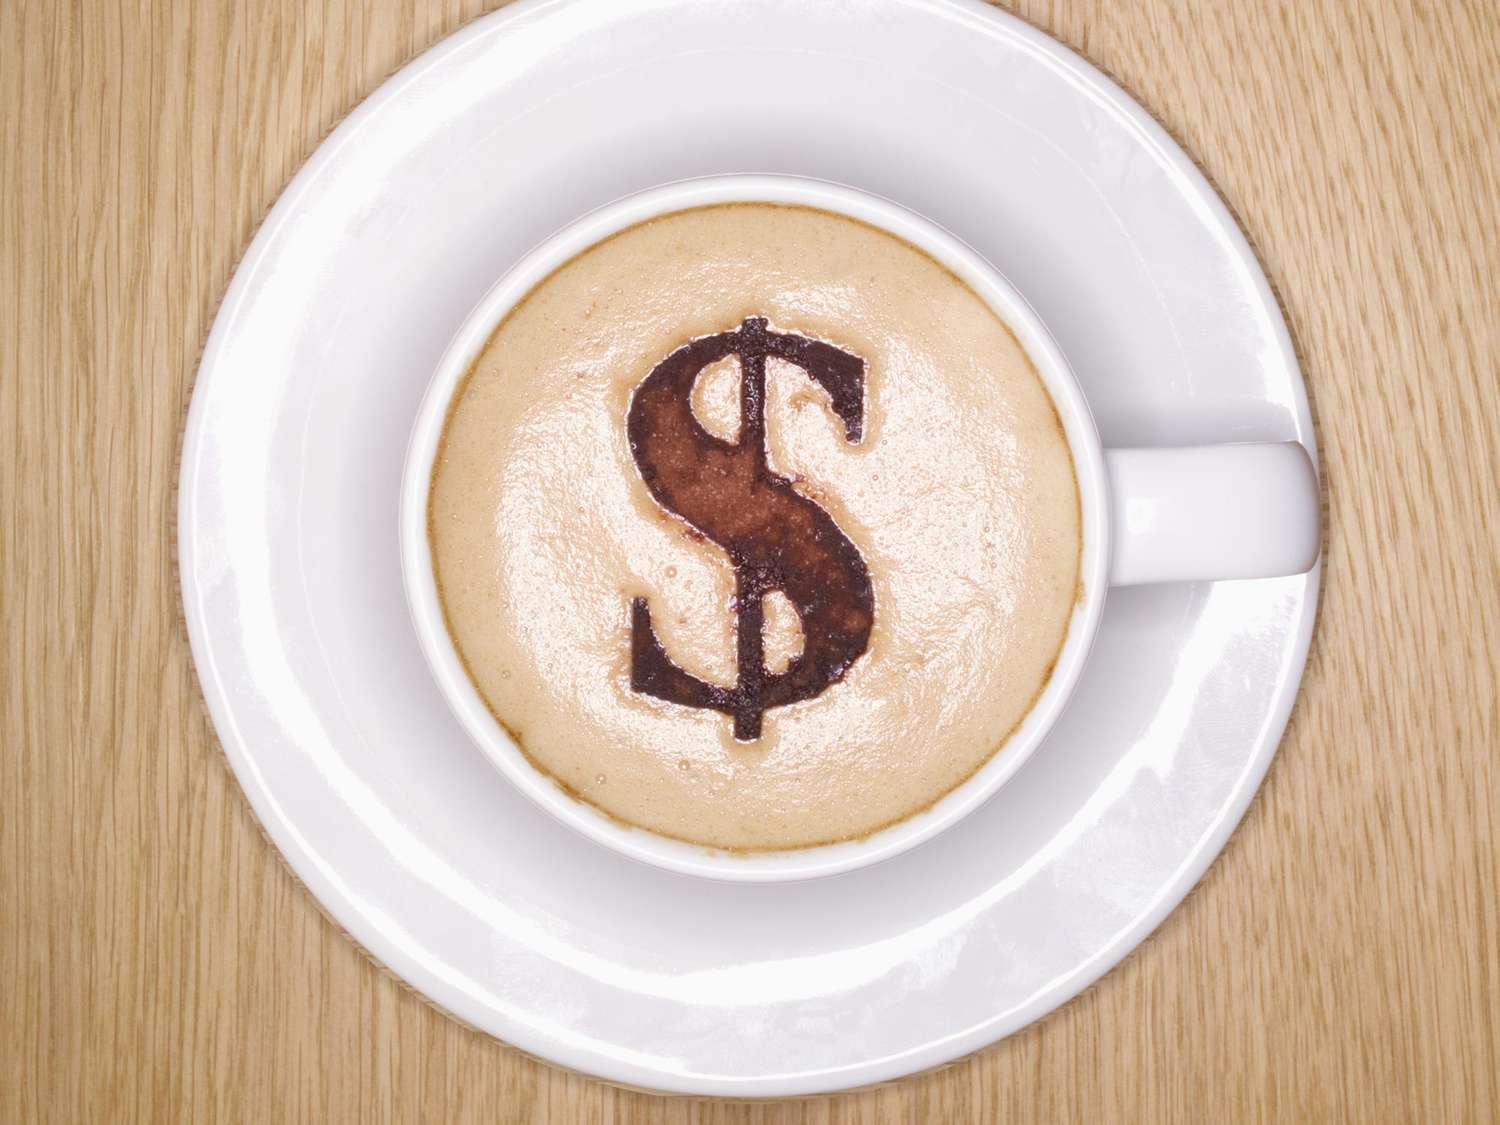 Cup of Cappachino with a Dollar Symbol made from Choclate on top